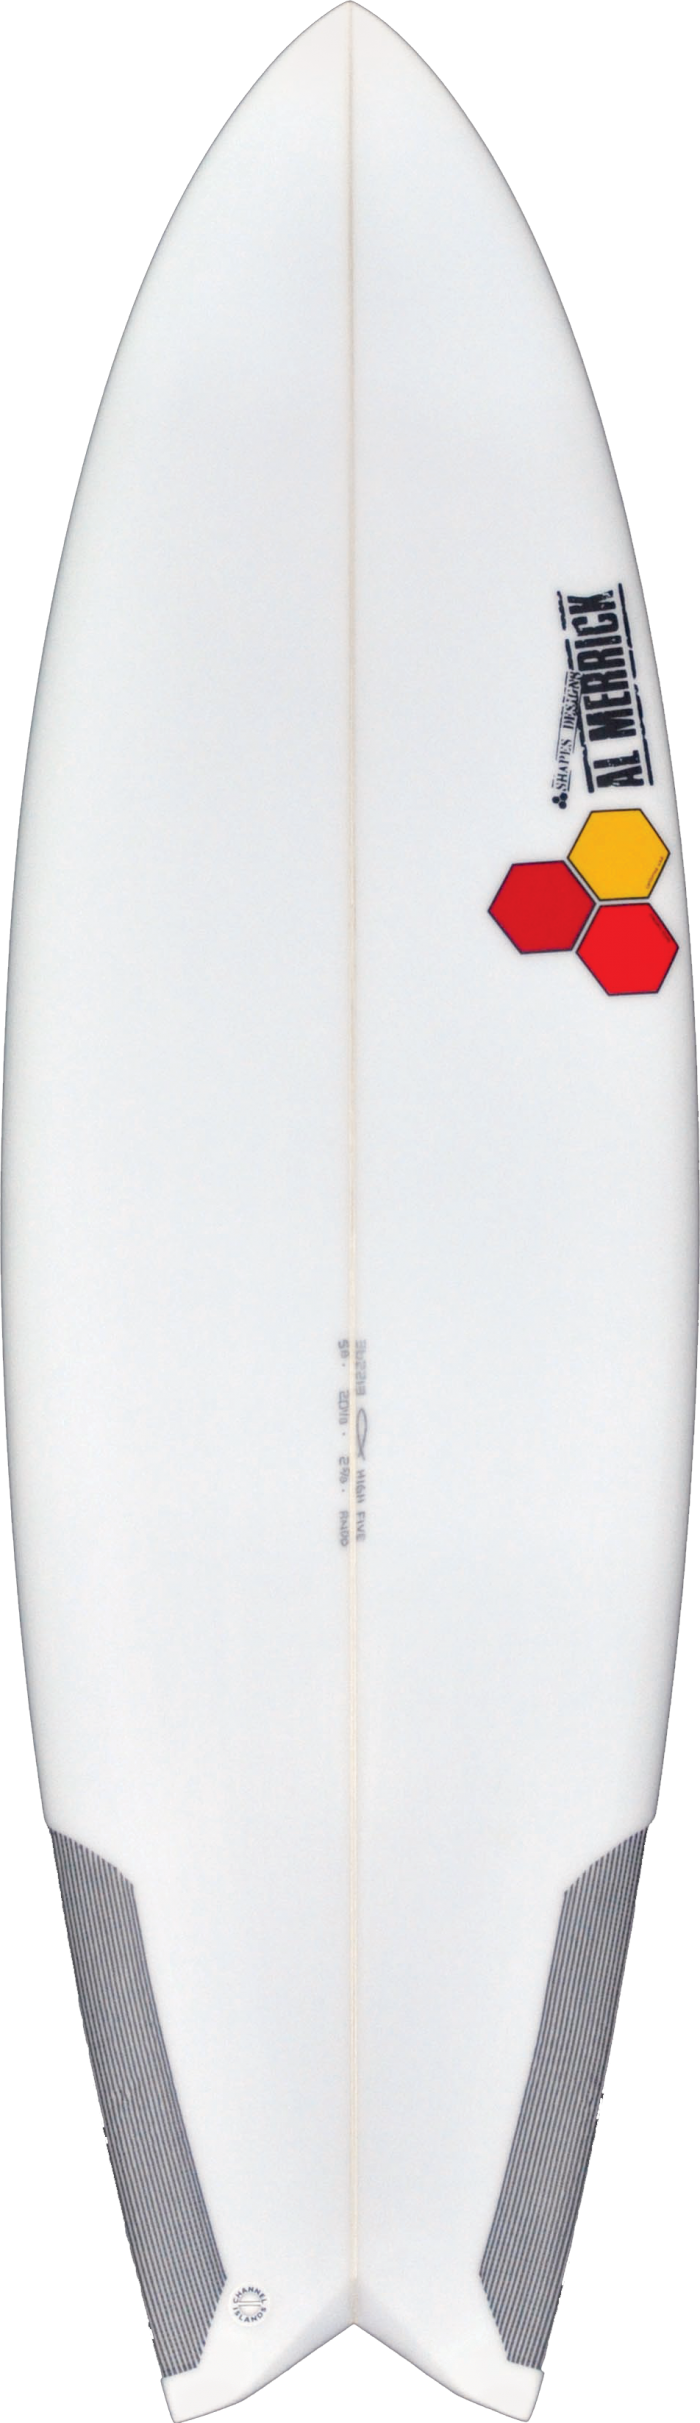 High 5 – Channel Islands Surfboards